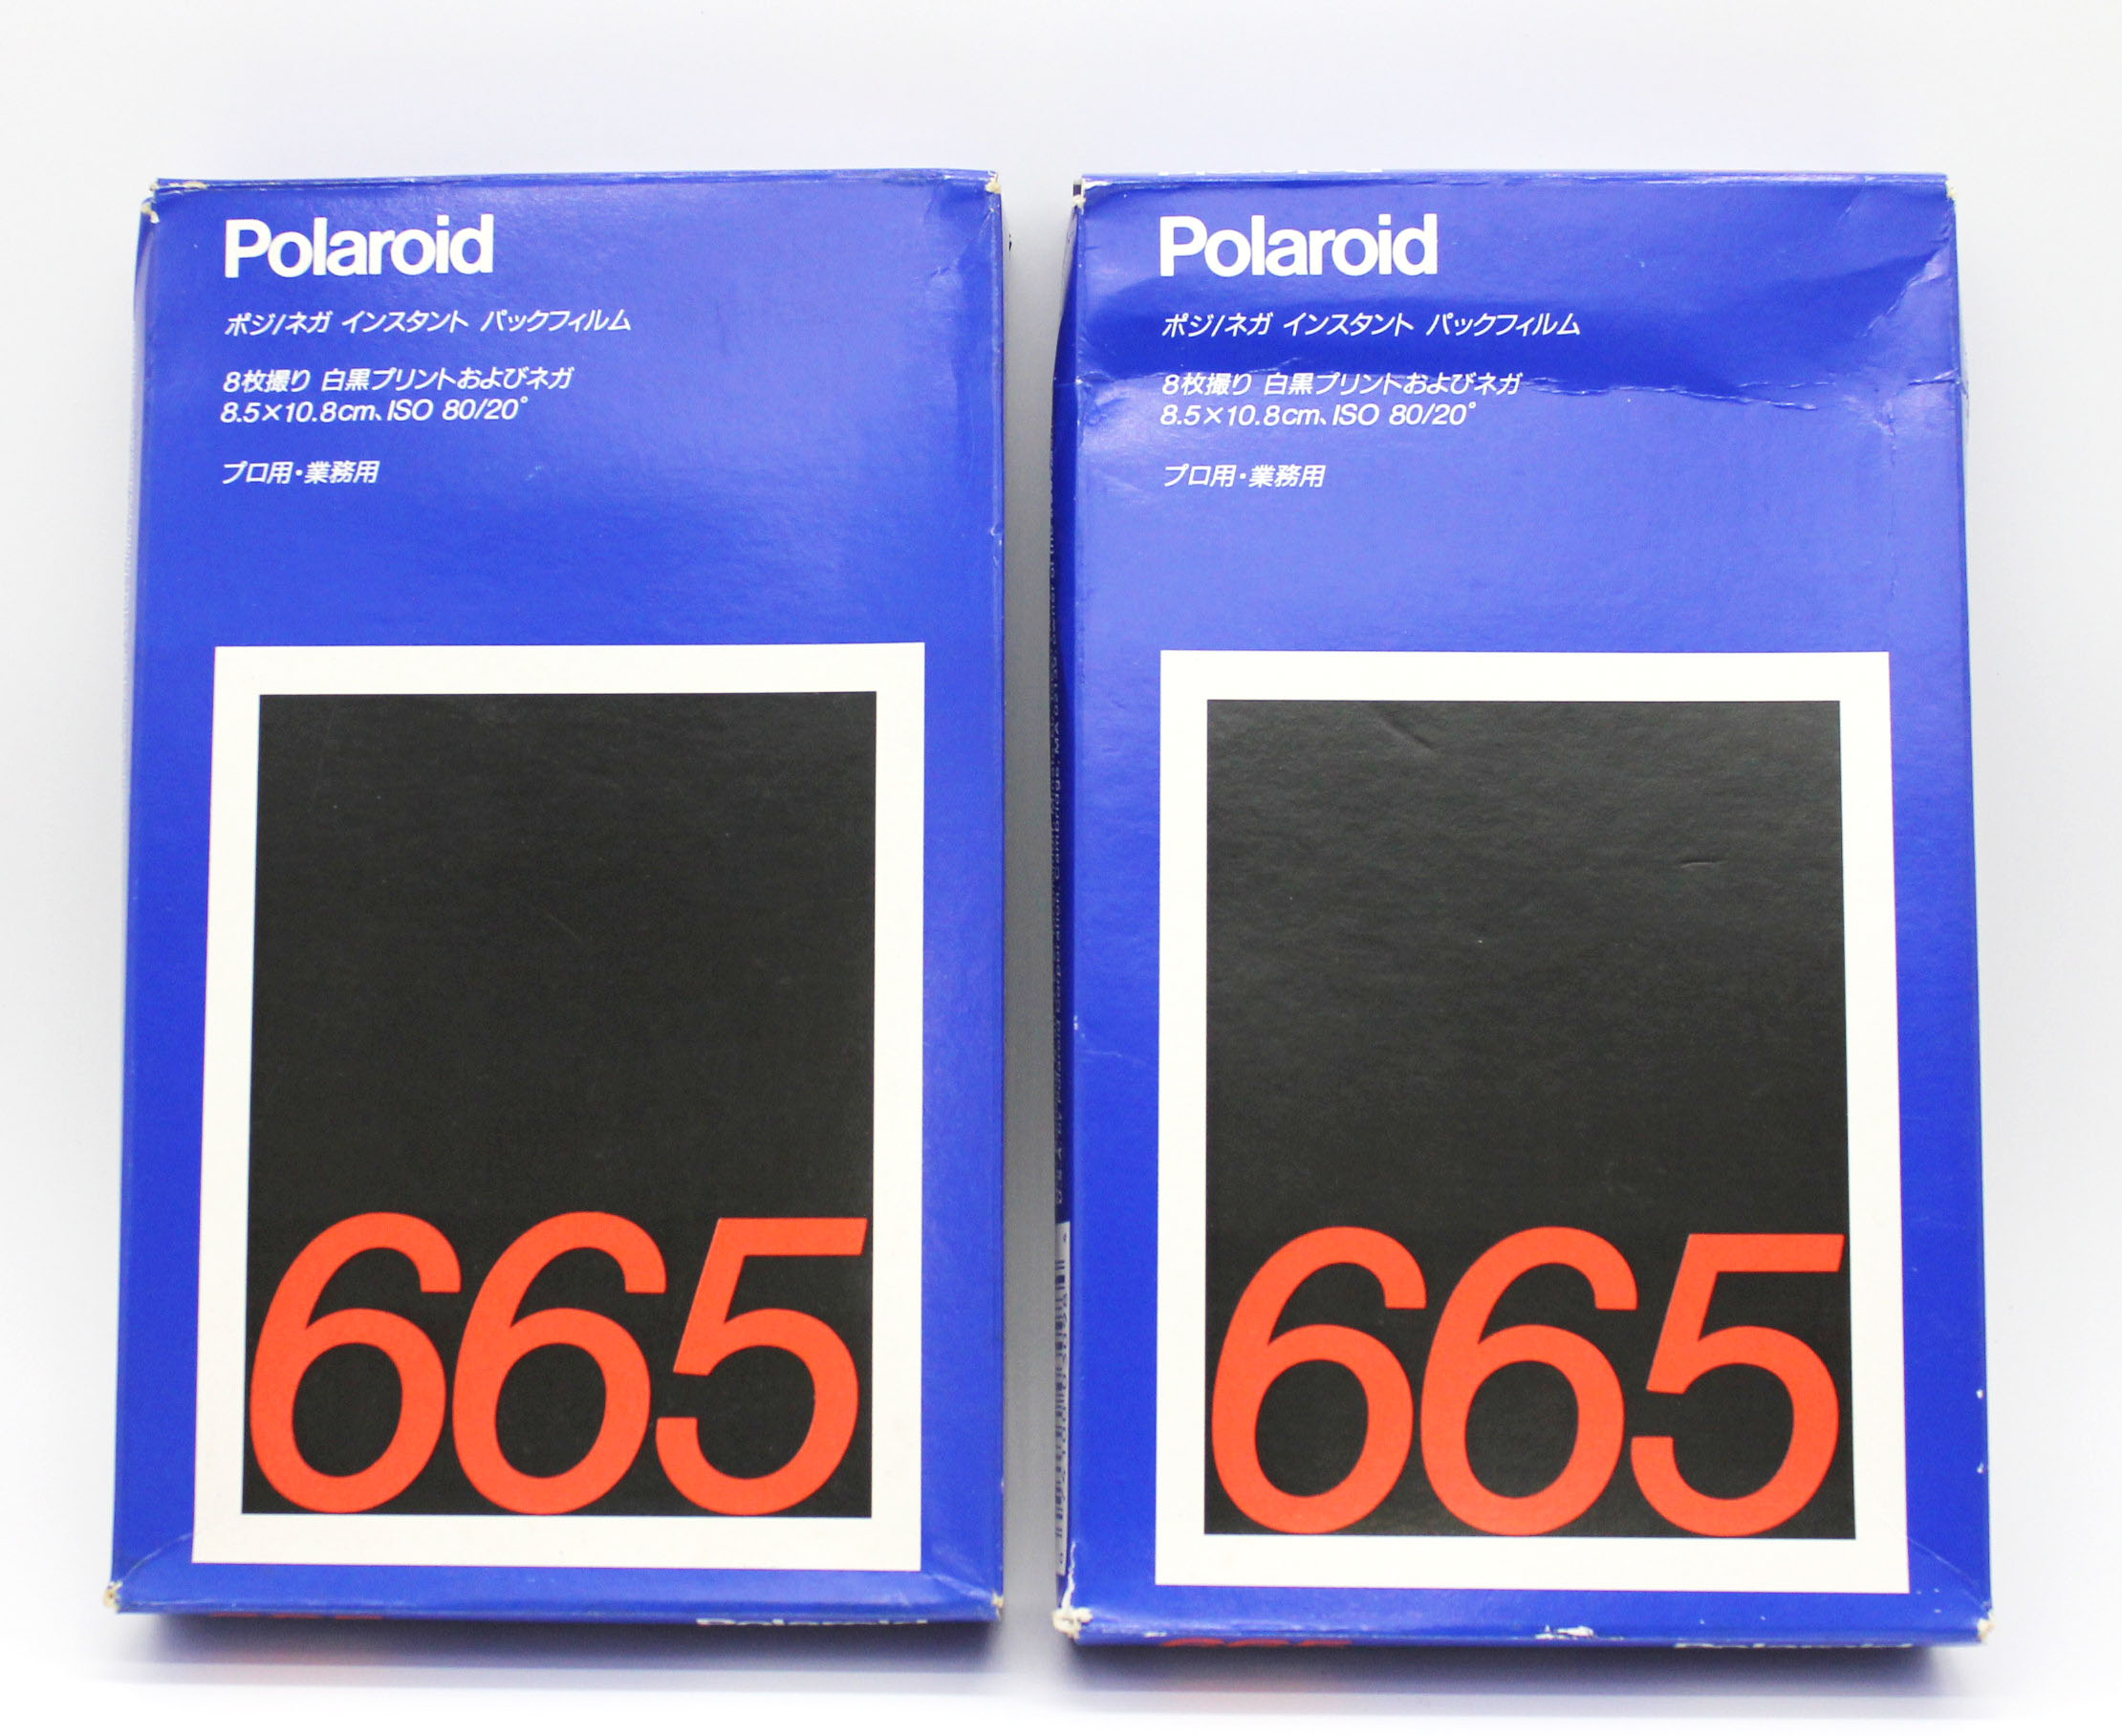 [Unused] Polaroid 665 Positive / Negative Instant Pack Film (2 Packs) Expired 11/1992 from Japan